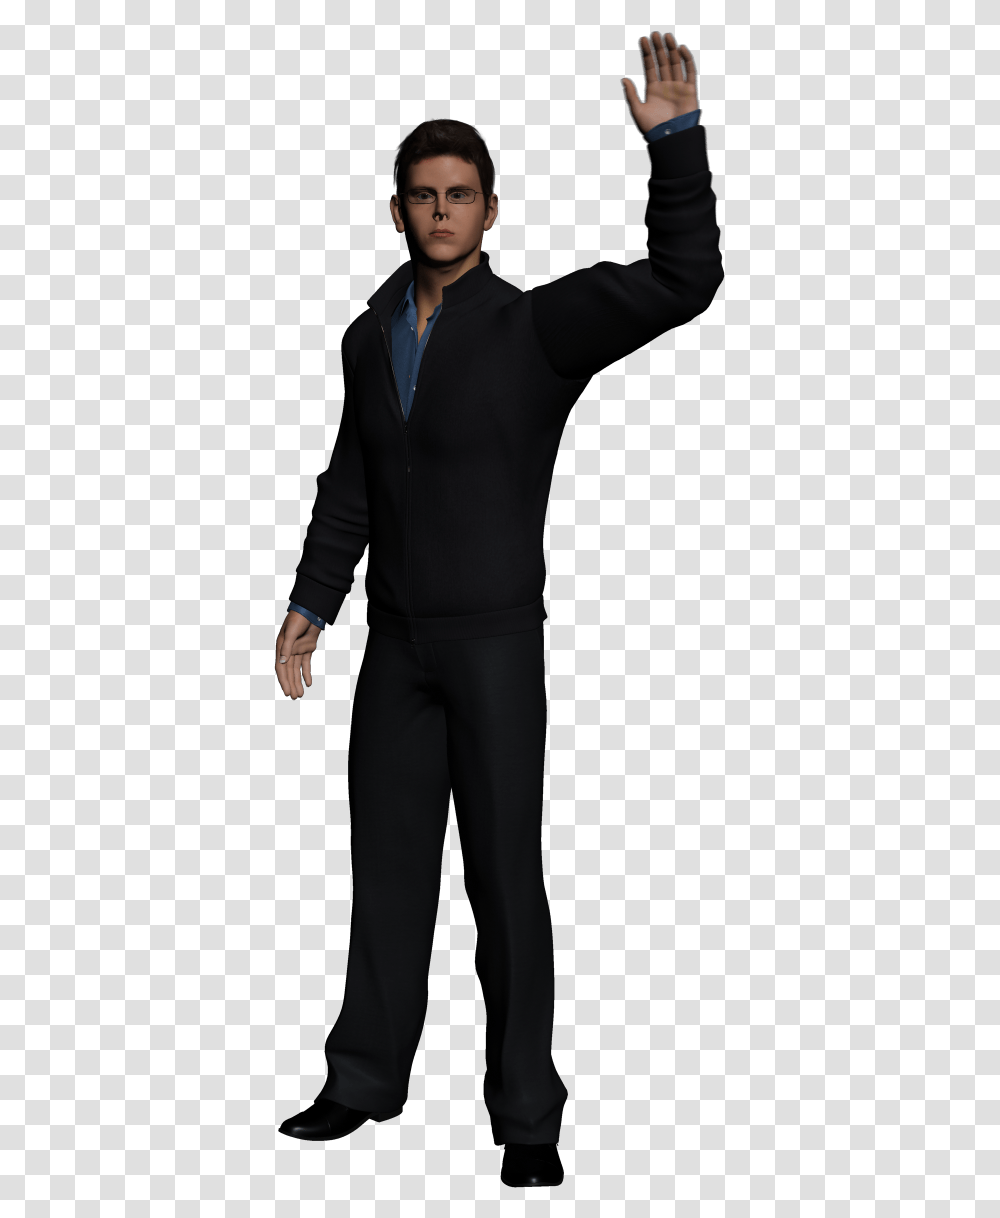 Human Body Image Person 3d Pose Estimation Human With Background, Suit, Overcoat, Sleeve Transparent Png